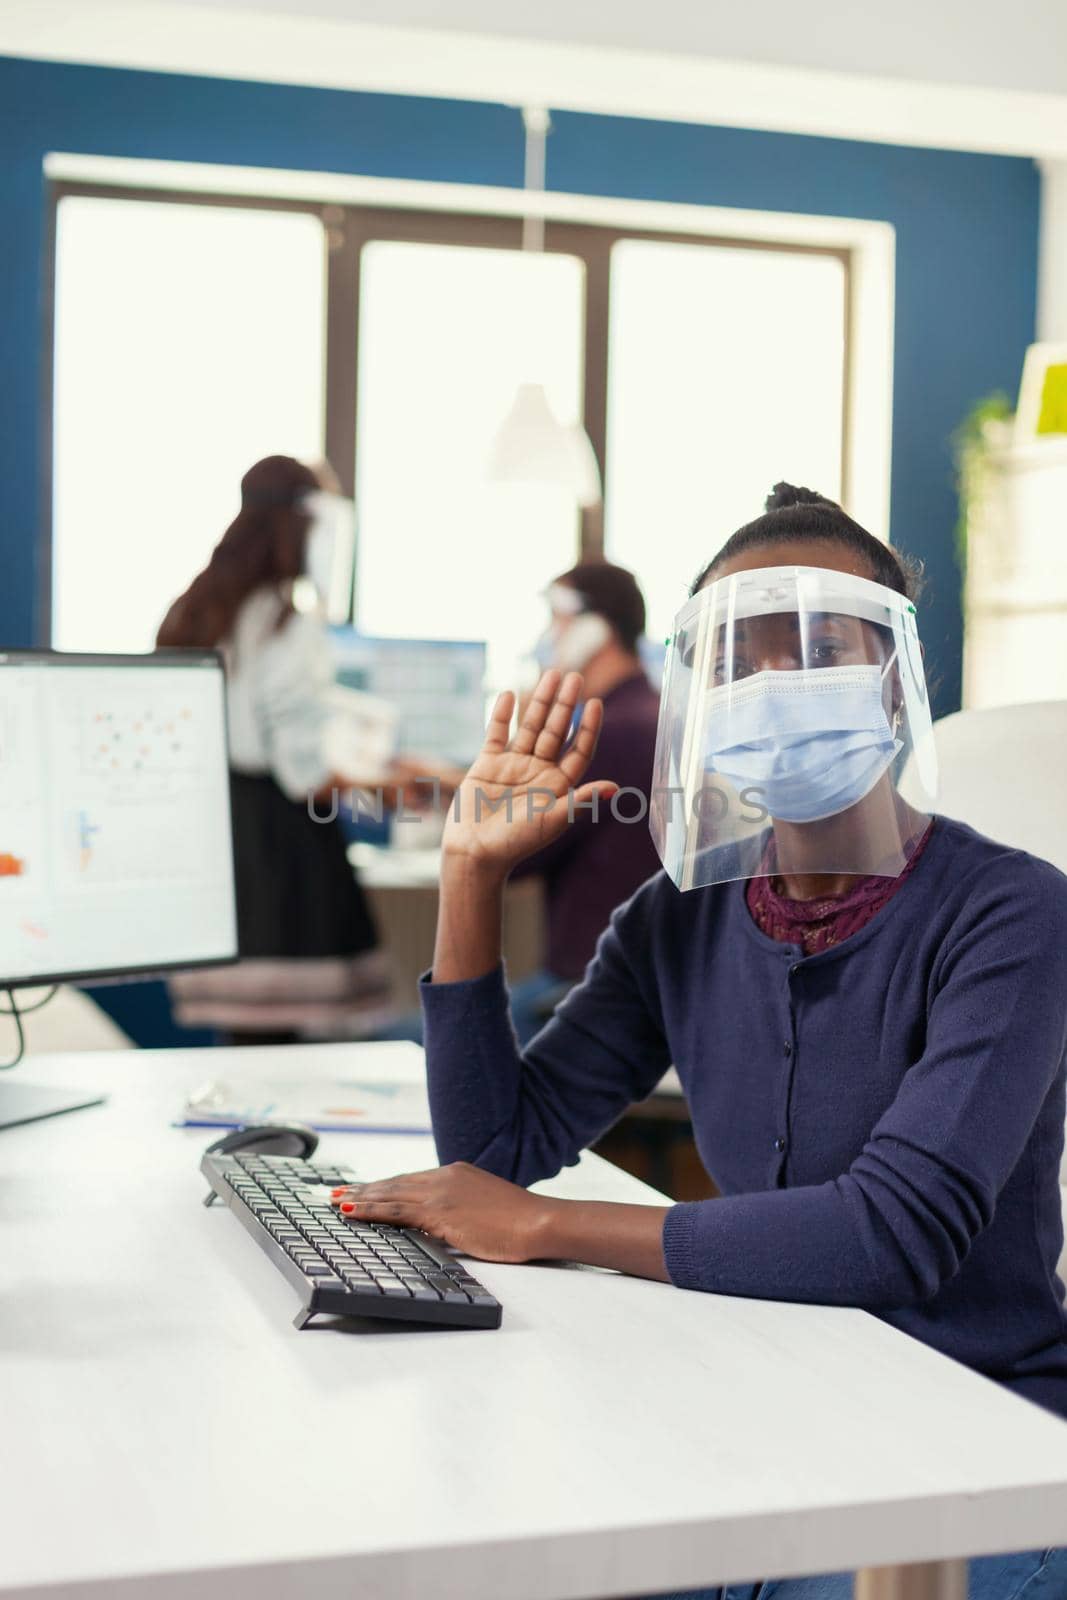 Pov of african worker in remotely call in workplace sitting at desk wearing face mask against covid19. Woman speaking with team during online conference while colleagues working in background.